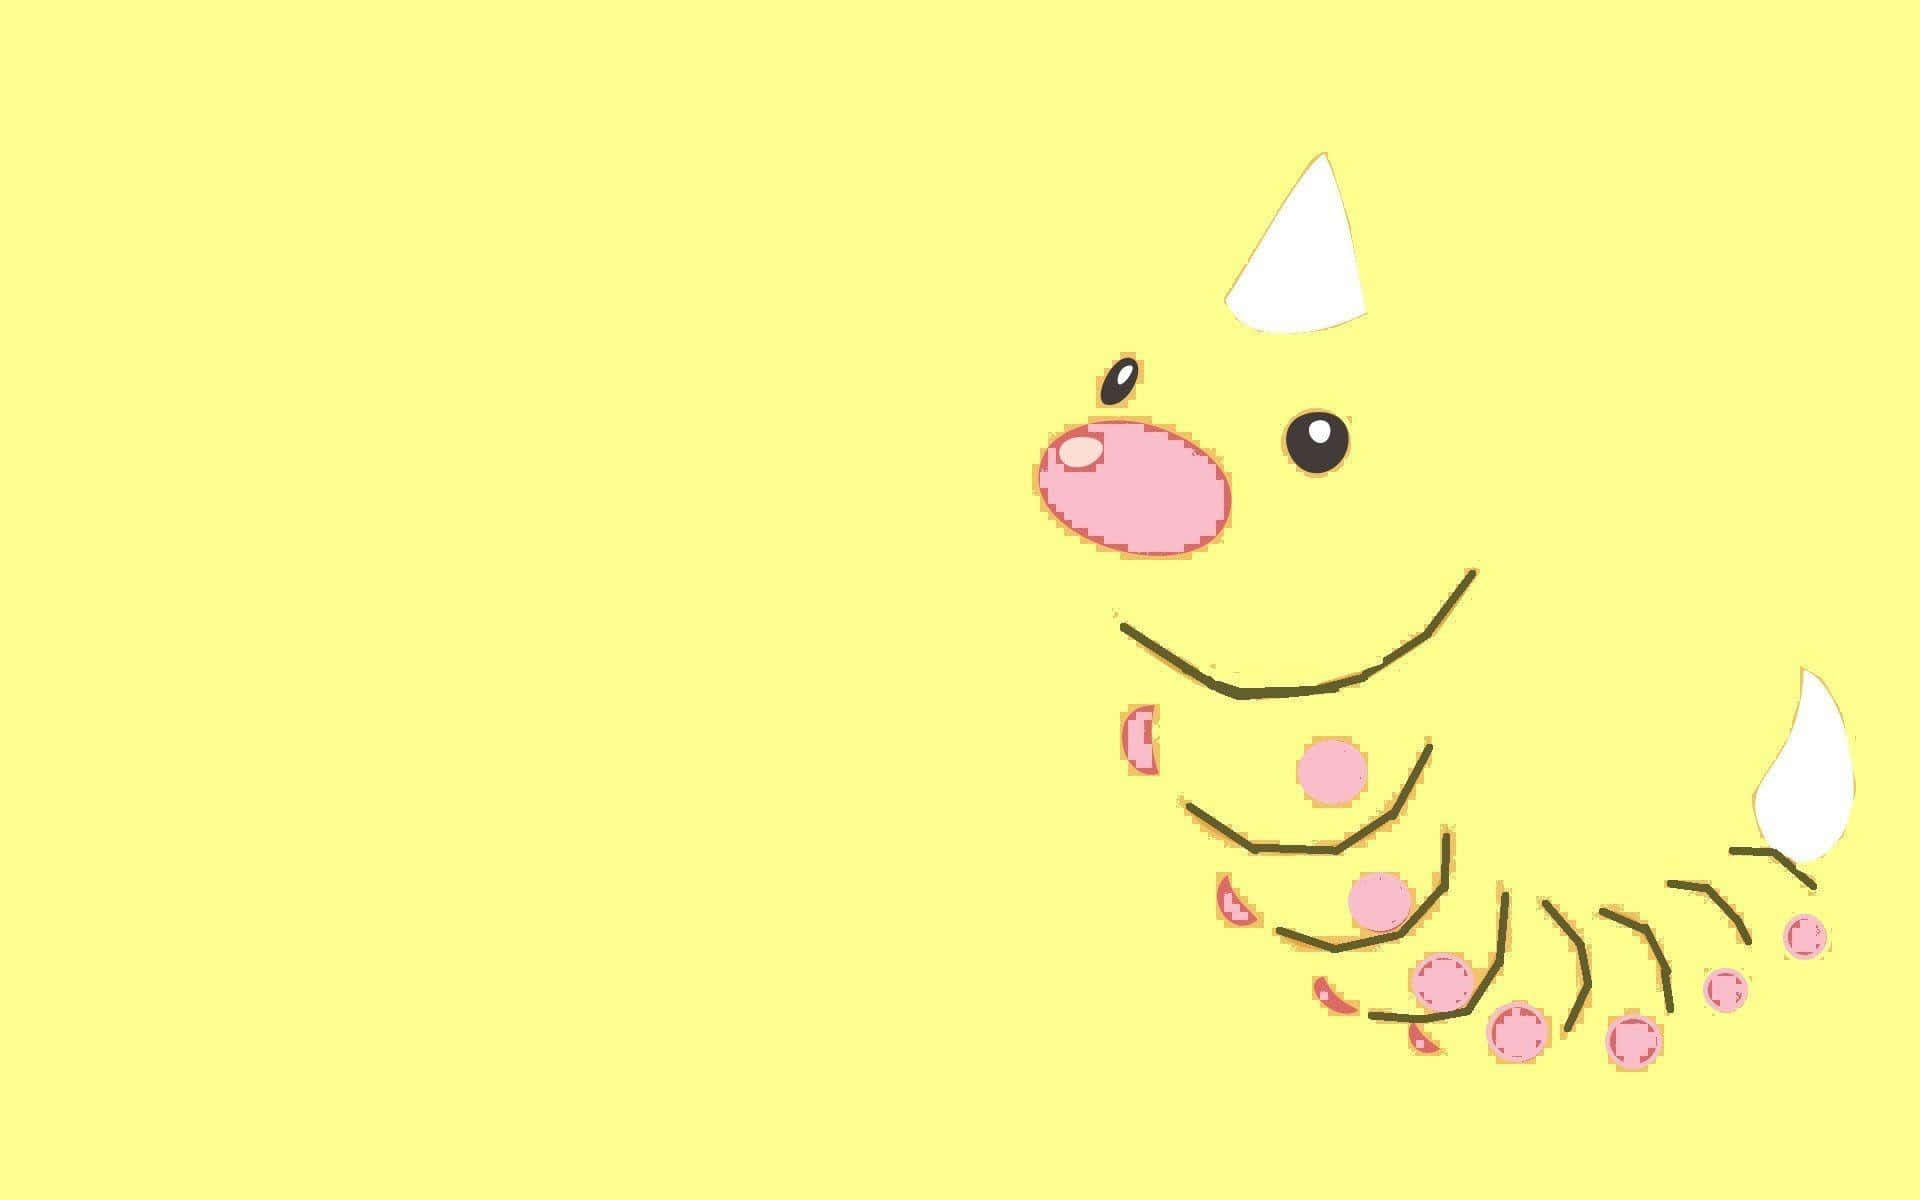 Abstract Weedle Artwork Wallpaper